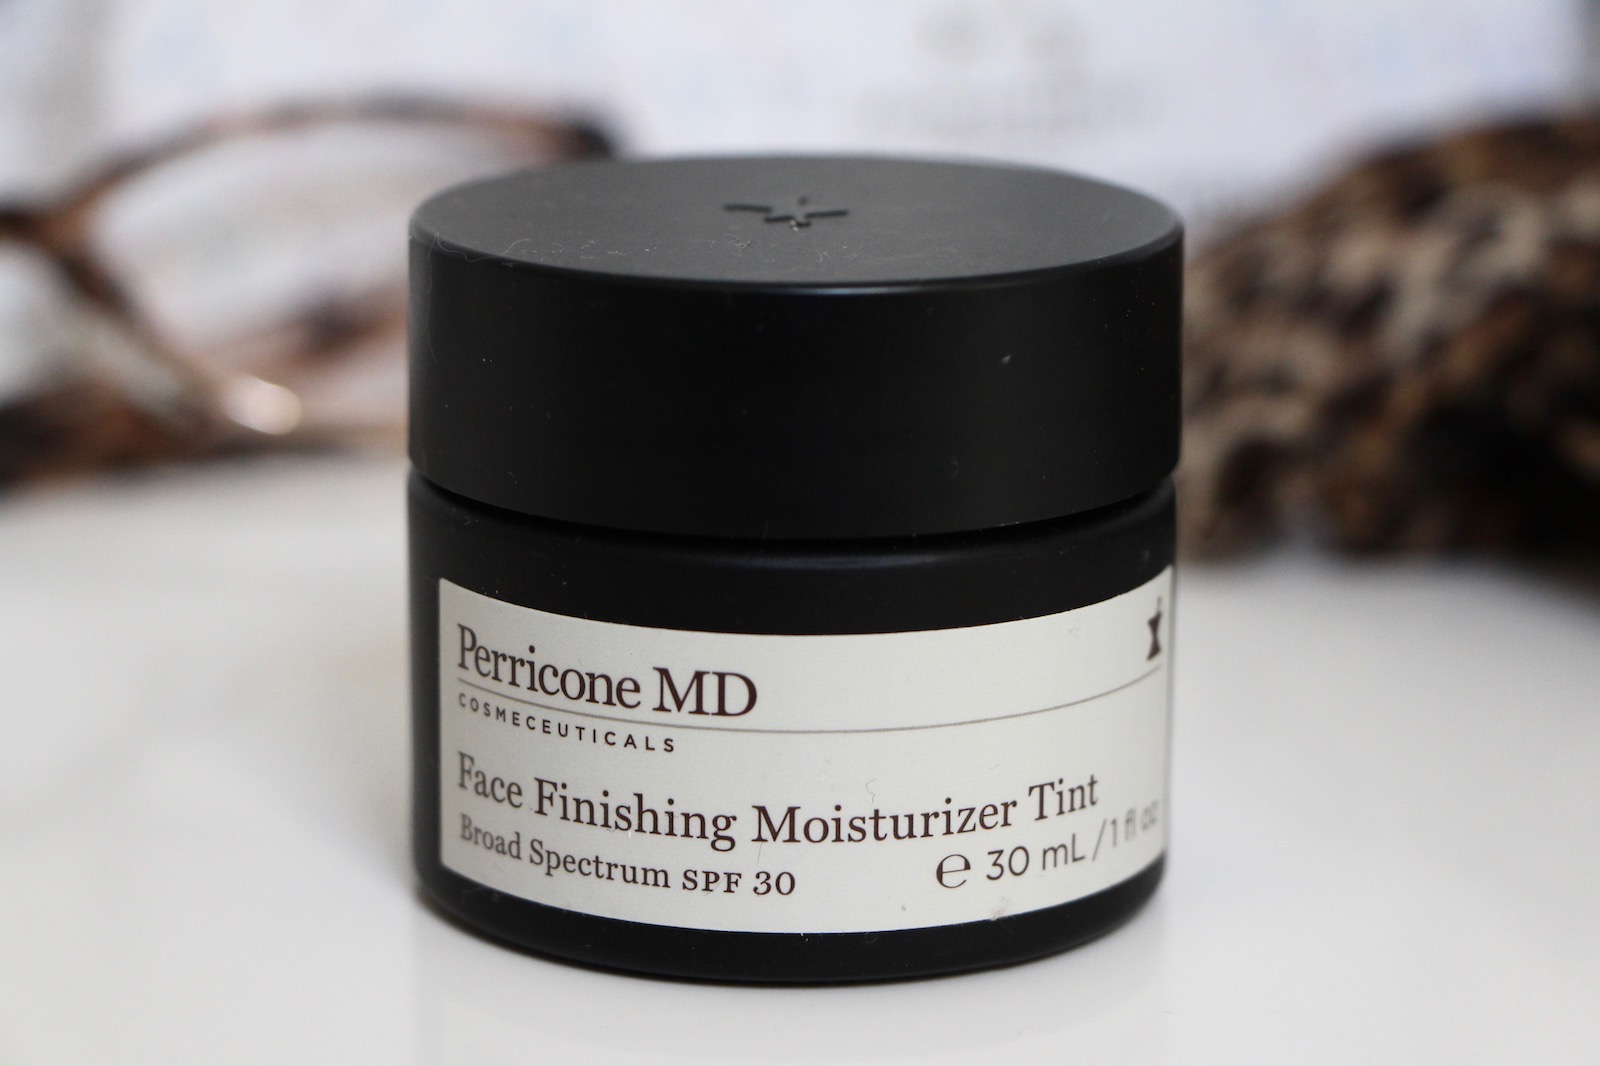 Perricone MD Face Finishing Moisturizer Tint Review